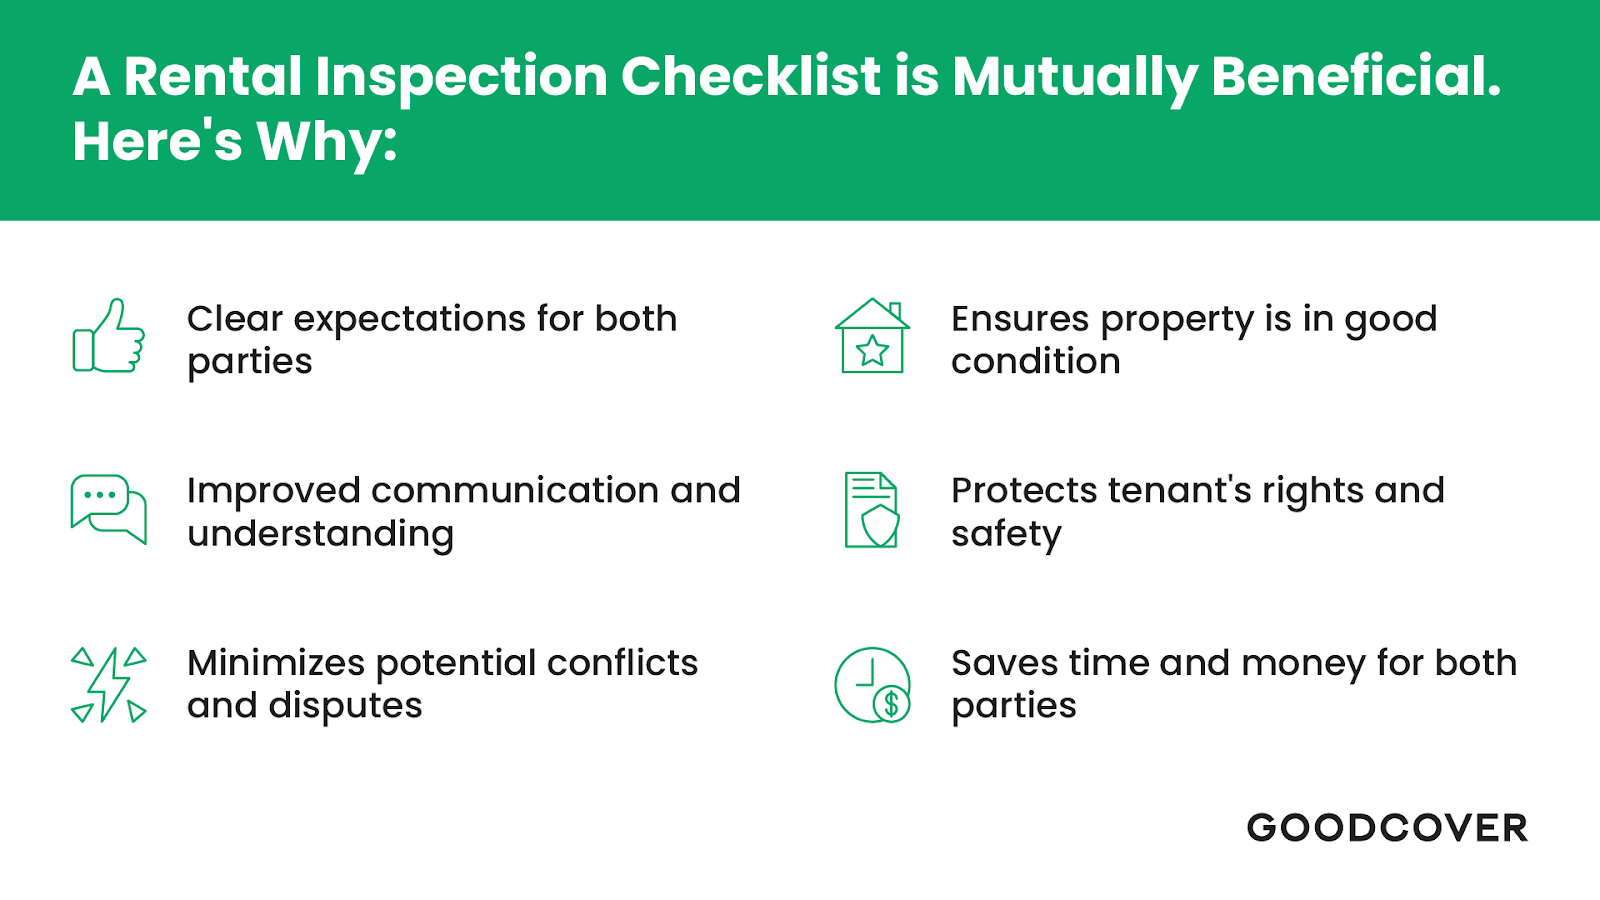 Remember that a rental inspection is mutually beneficial. 